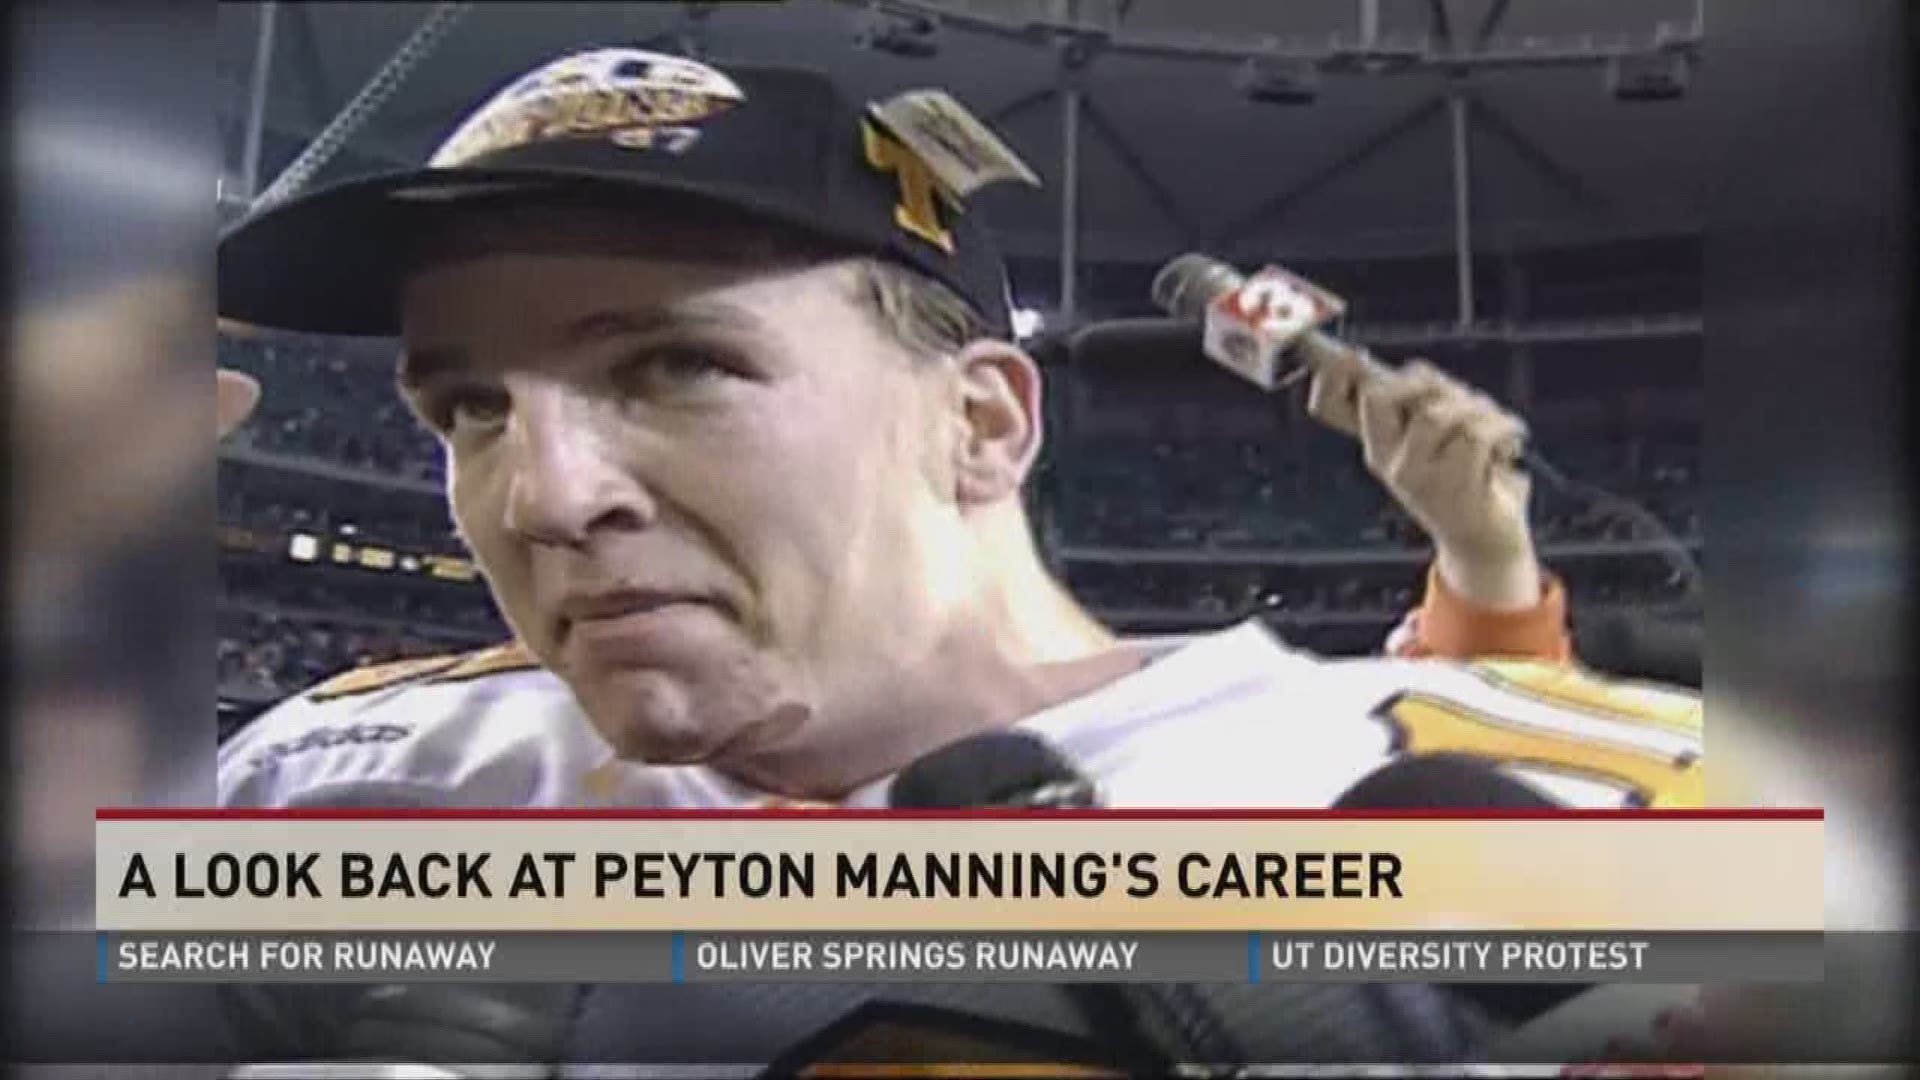 A Look Back At Peyton Manning's Career